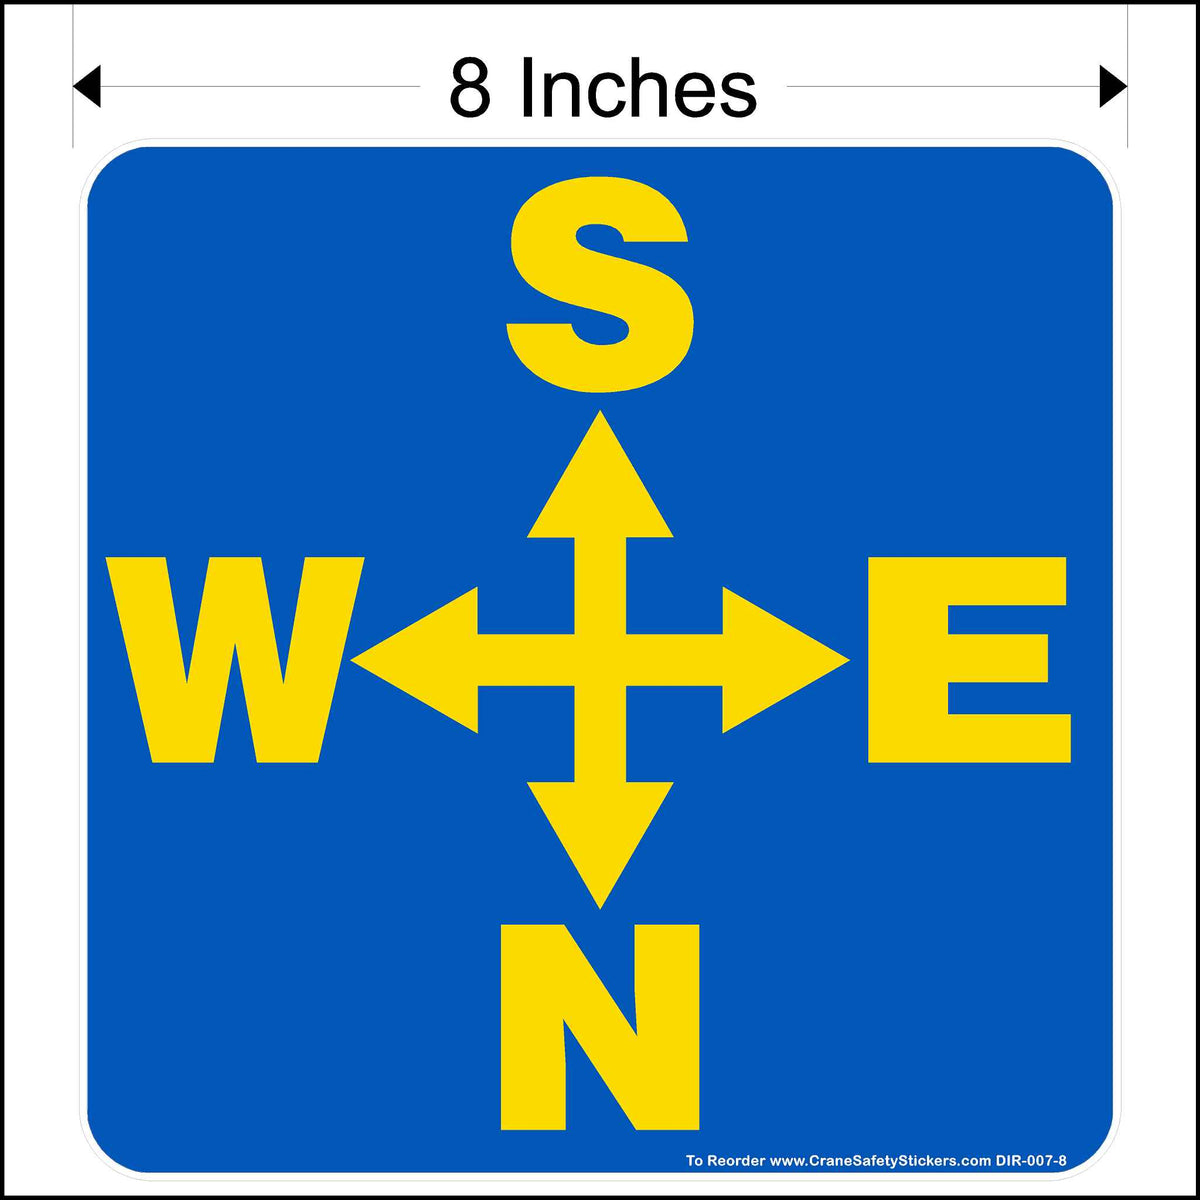 Eight inch overhead crane decal printed with yellow south, notrth, east, and west arrows on a blue background.